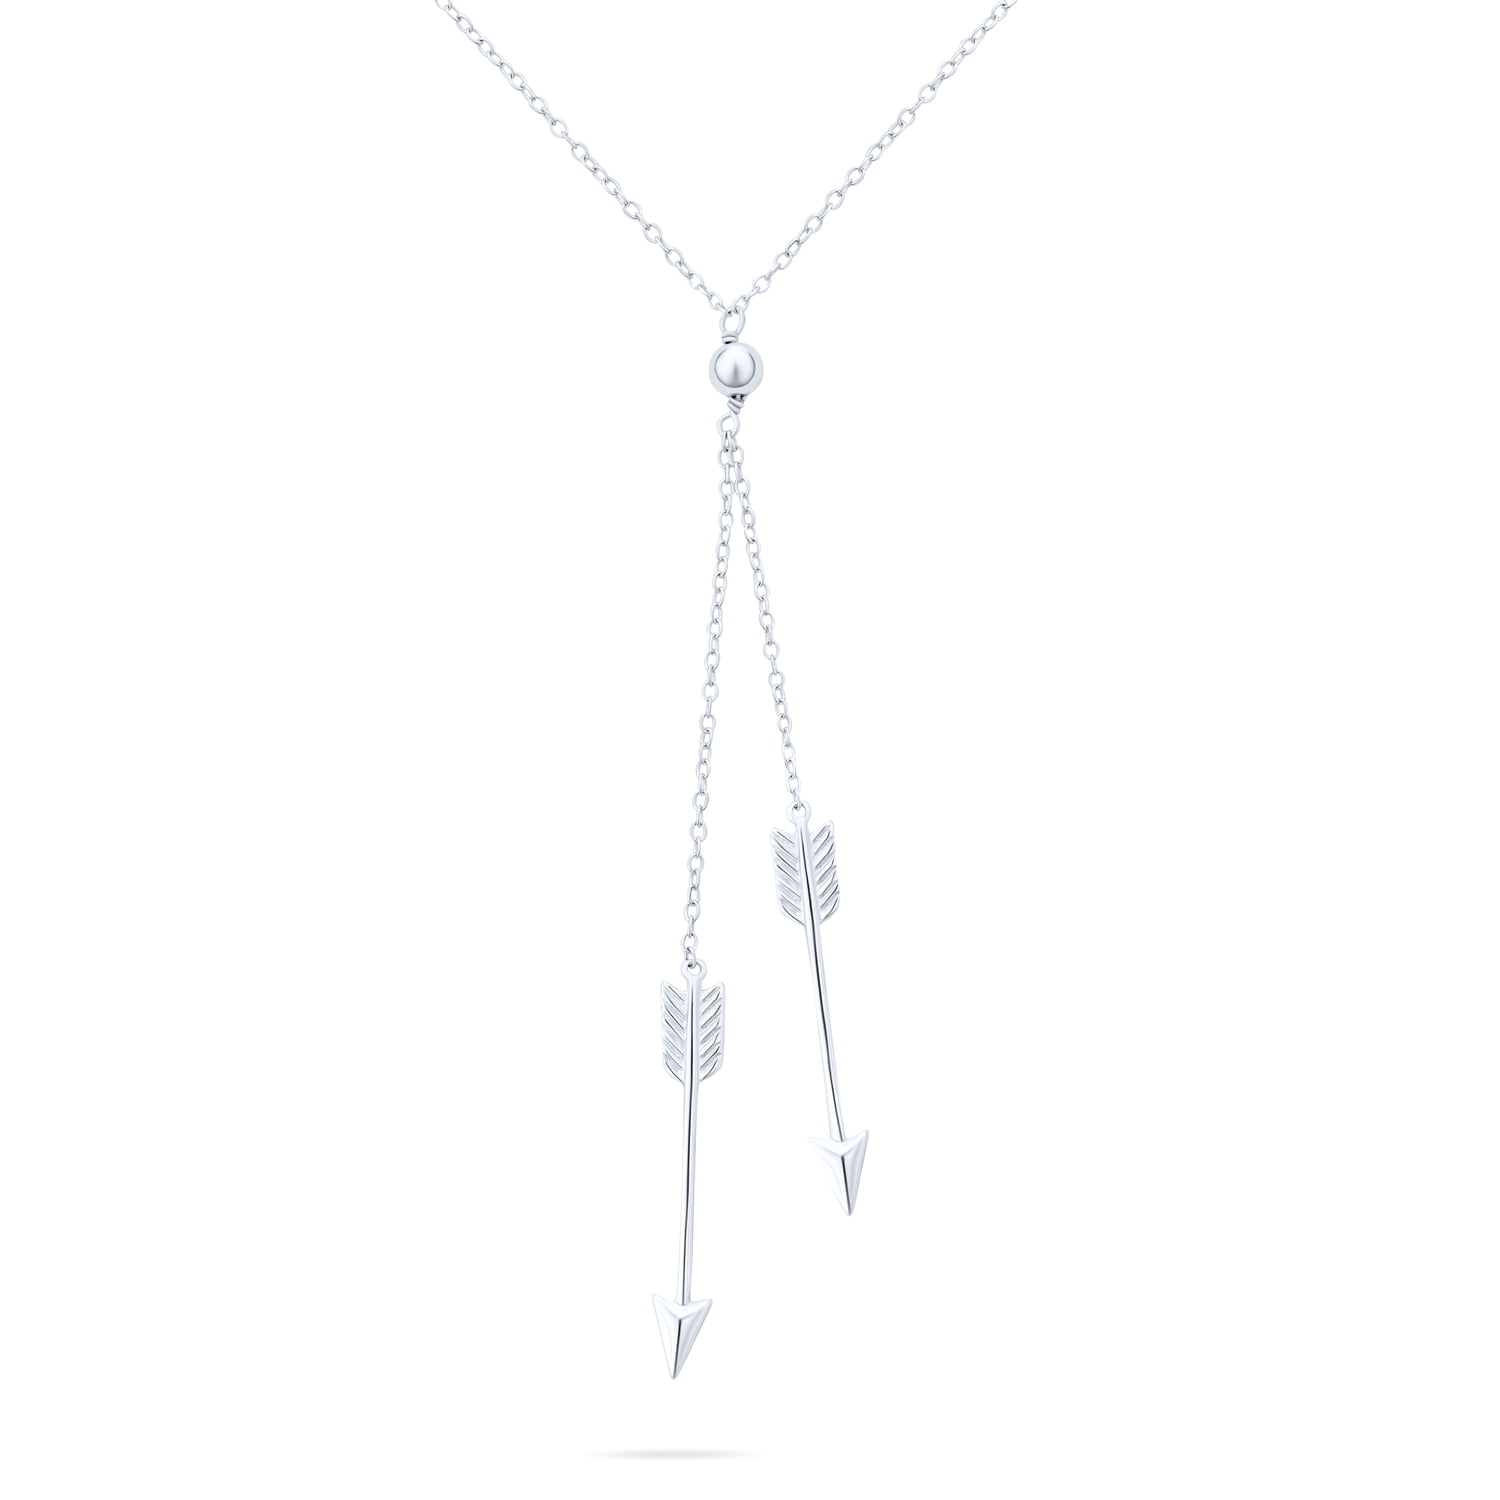 Cupid Arrow Heart Lariat Pendant Necklace Pave CZ Sterling Silver Necklace 